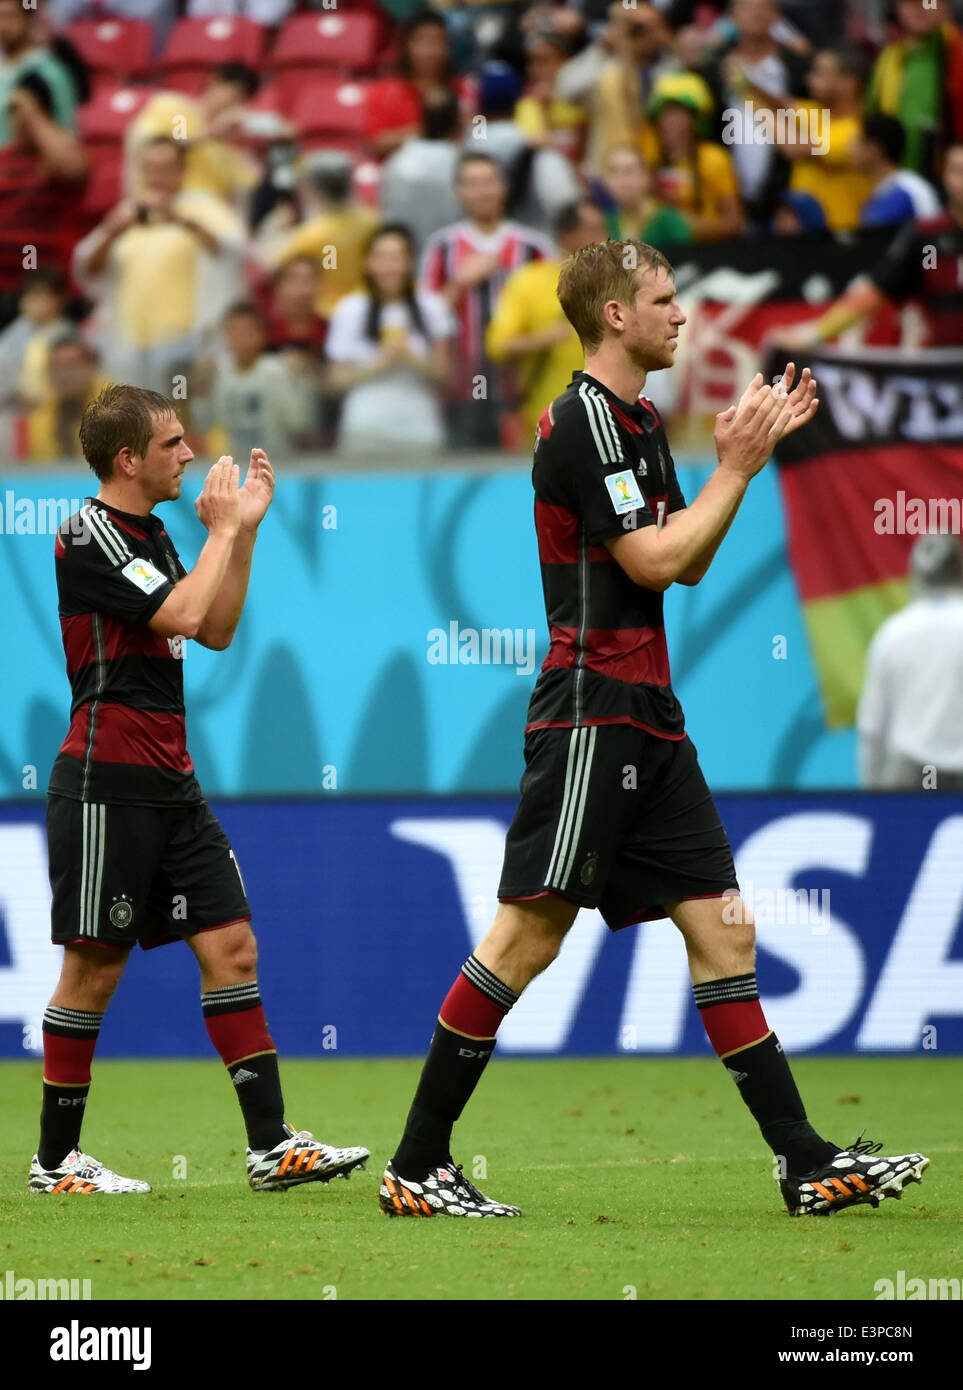 Recife, Brazil. 26th June, 2014. Germany's Philipp Lahm (L) and Per Mertesacker celebrate the victory and their entrance to Rround of 16 after a Group G match between the U.S. and Germany of 2014 FIFA World Cup at the Arena Pernambuco Stadium in Recife, Brazil, on June 26, 2014. Germany won 1-0 over the U.S. on Thursday. Germany and the U.S. enter Round of 16 from Group G. Credit:  Guo Yong/Xinhua/Alamy Live News Stock Photo